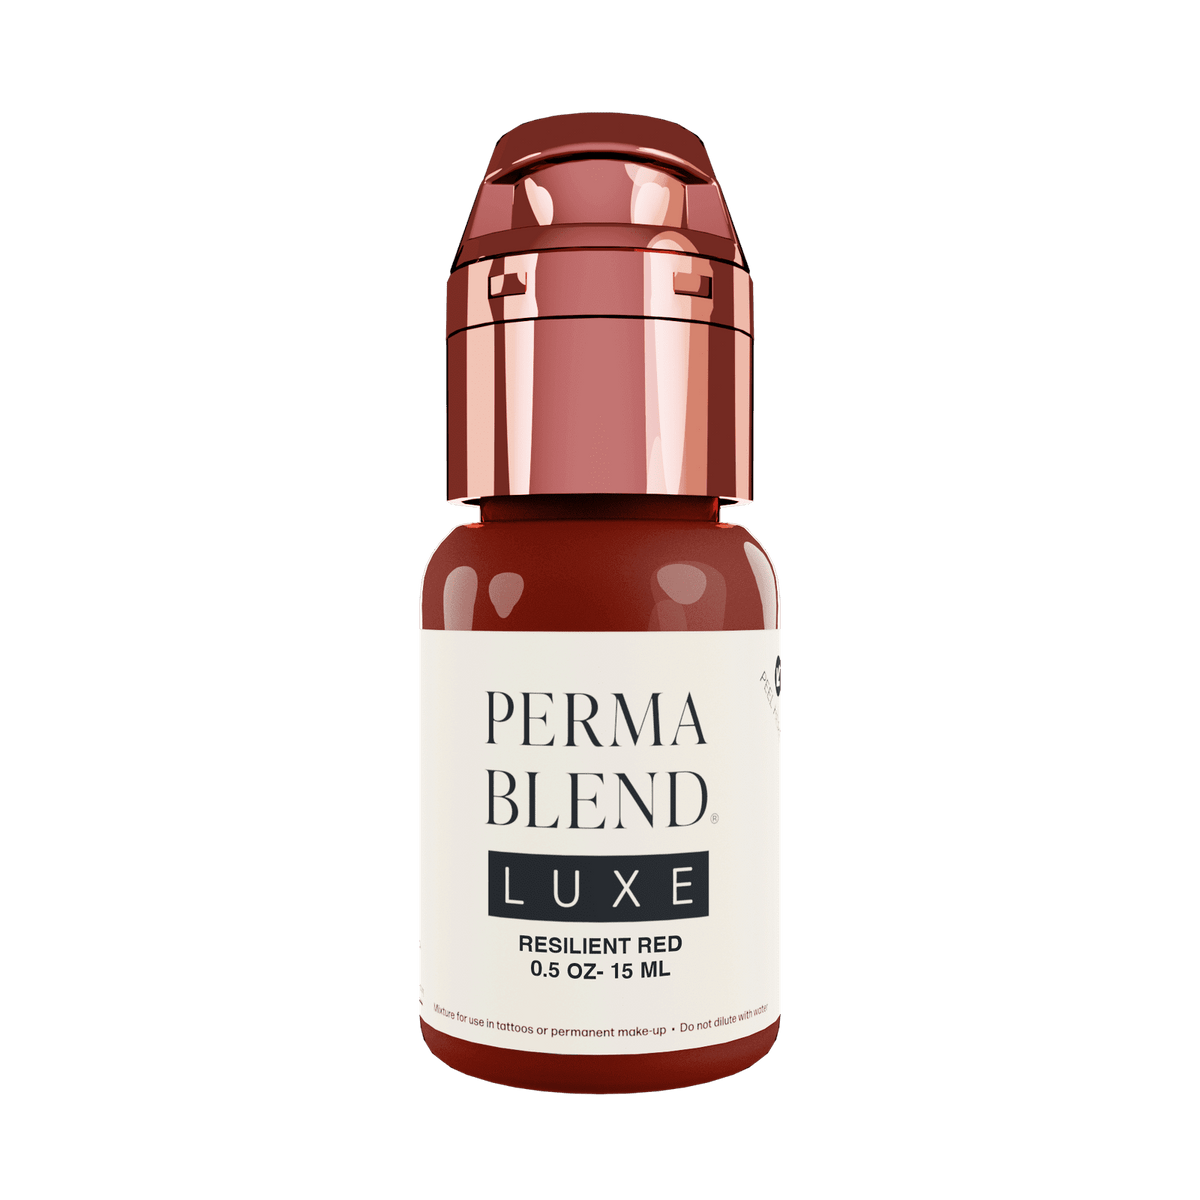 Perma Blend Luxe Resilient Red